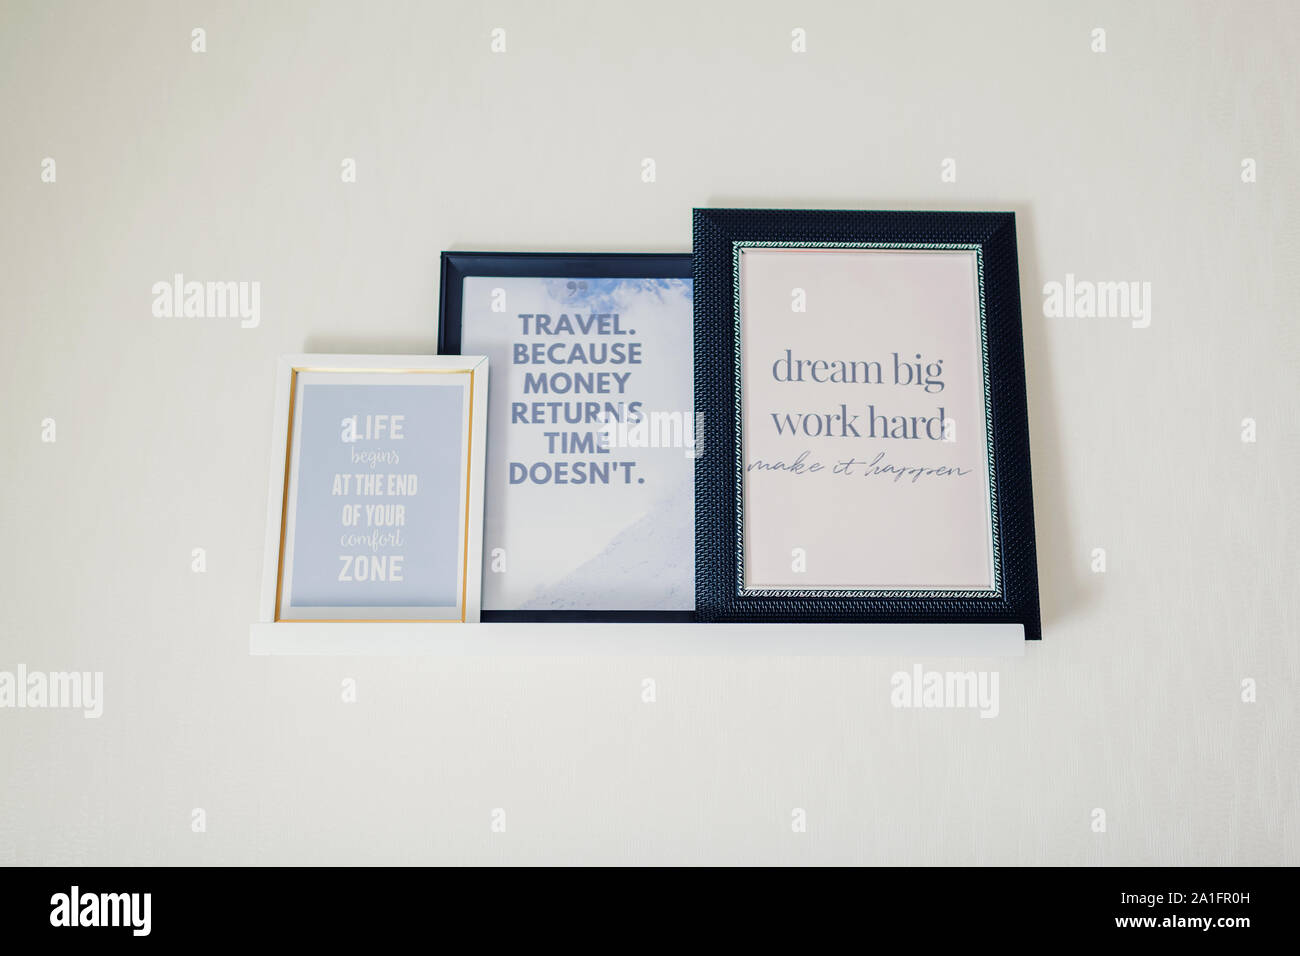 Frames With Motivational And Inspirational Quotes About Put